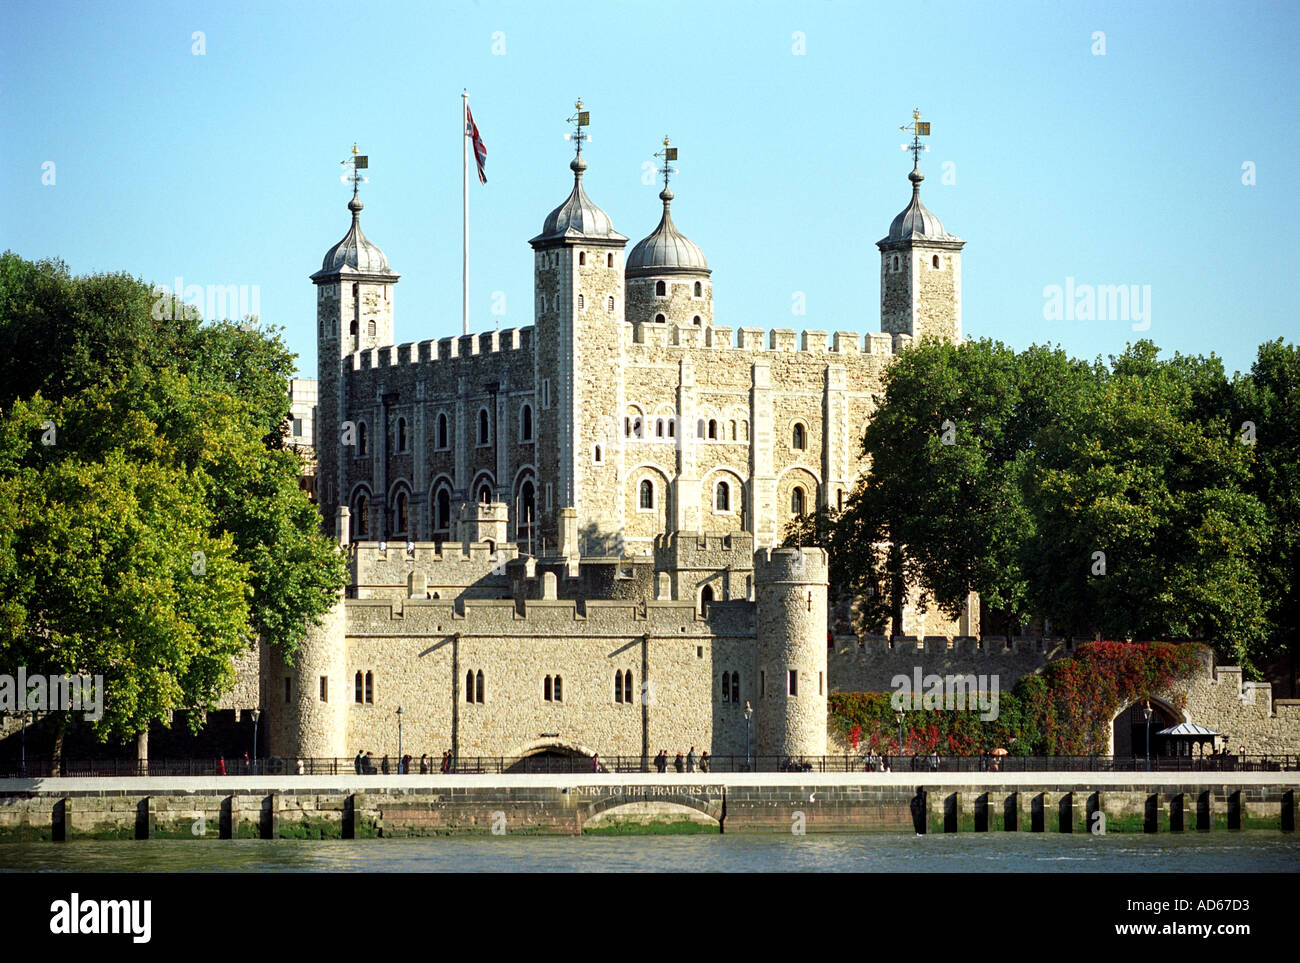 The Tower of London, England, UK Stock Photo